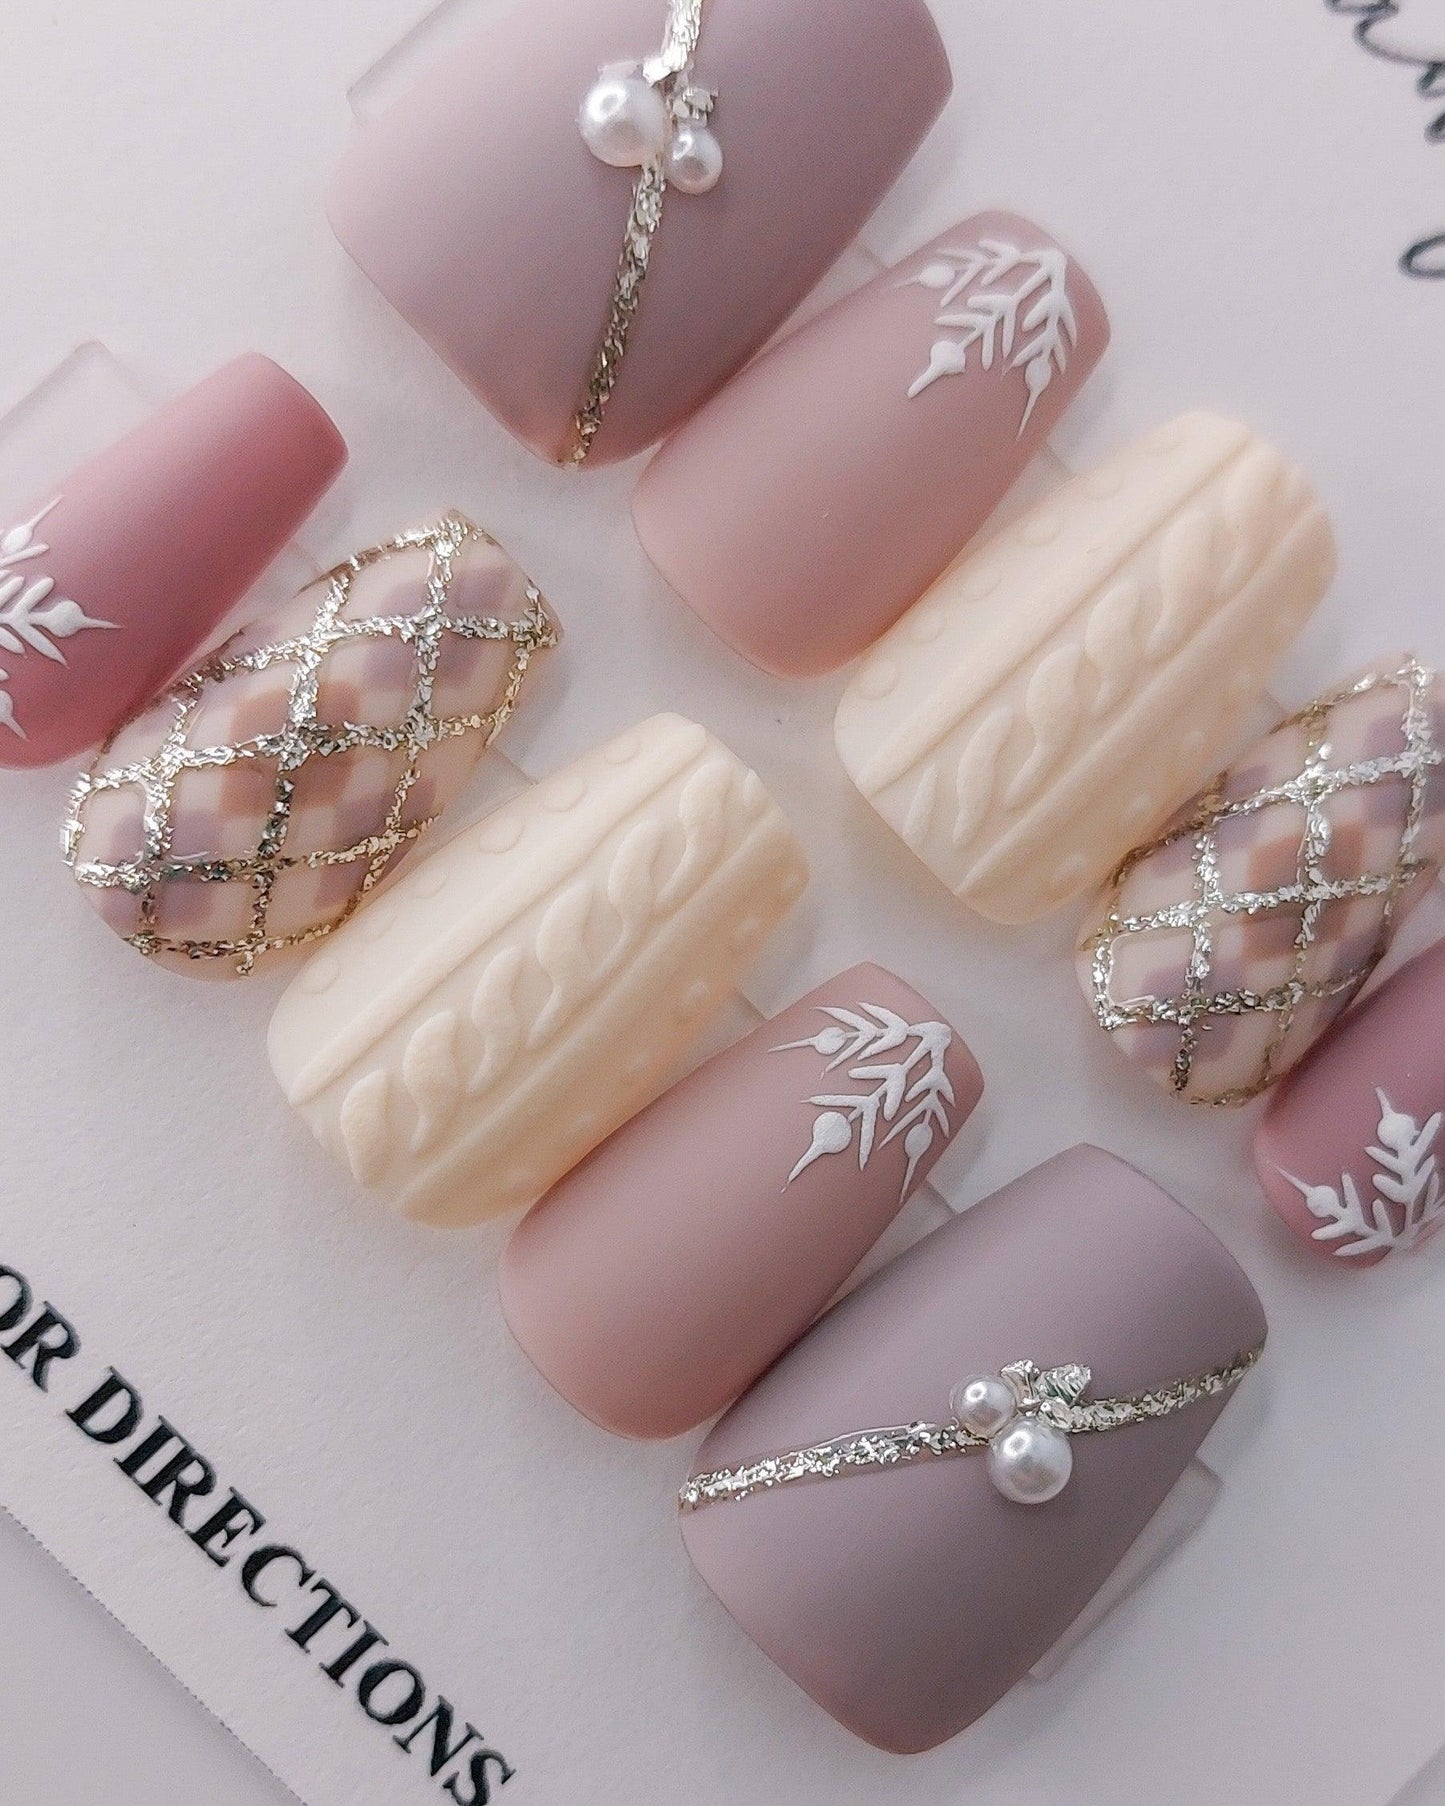 Custom Press on Nail Design. Light mauve purples with hand drawn white snowflakes, plaid with glitter, 3d sweater nail, silver glitter lines, and pearls.